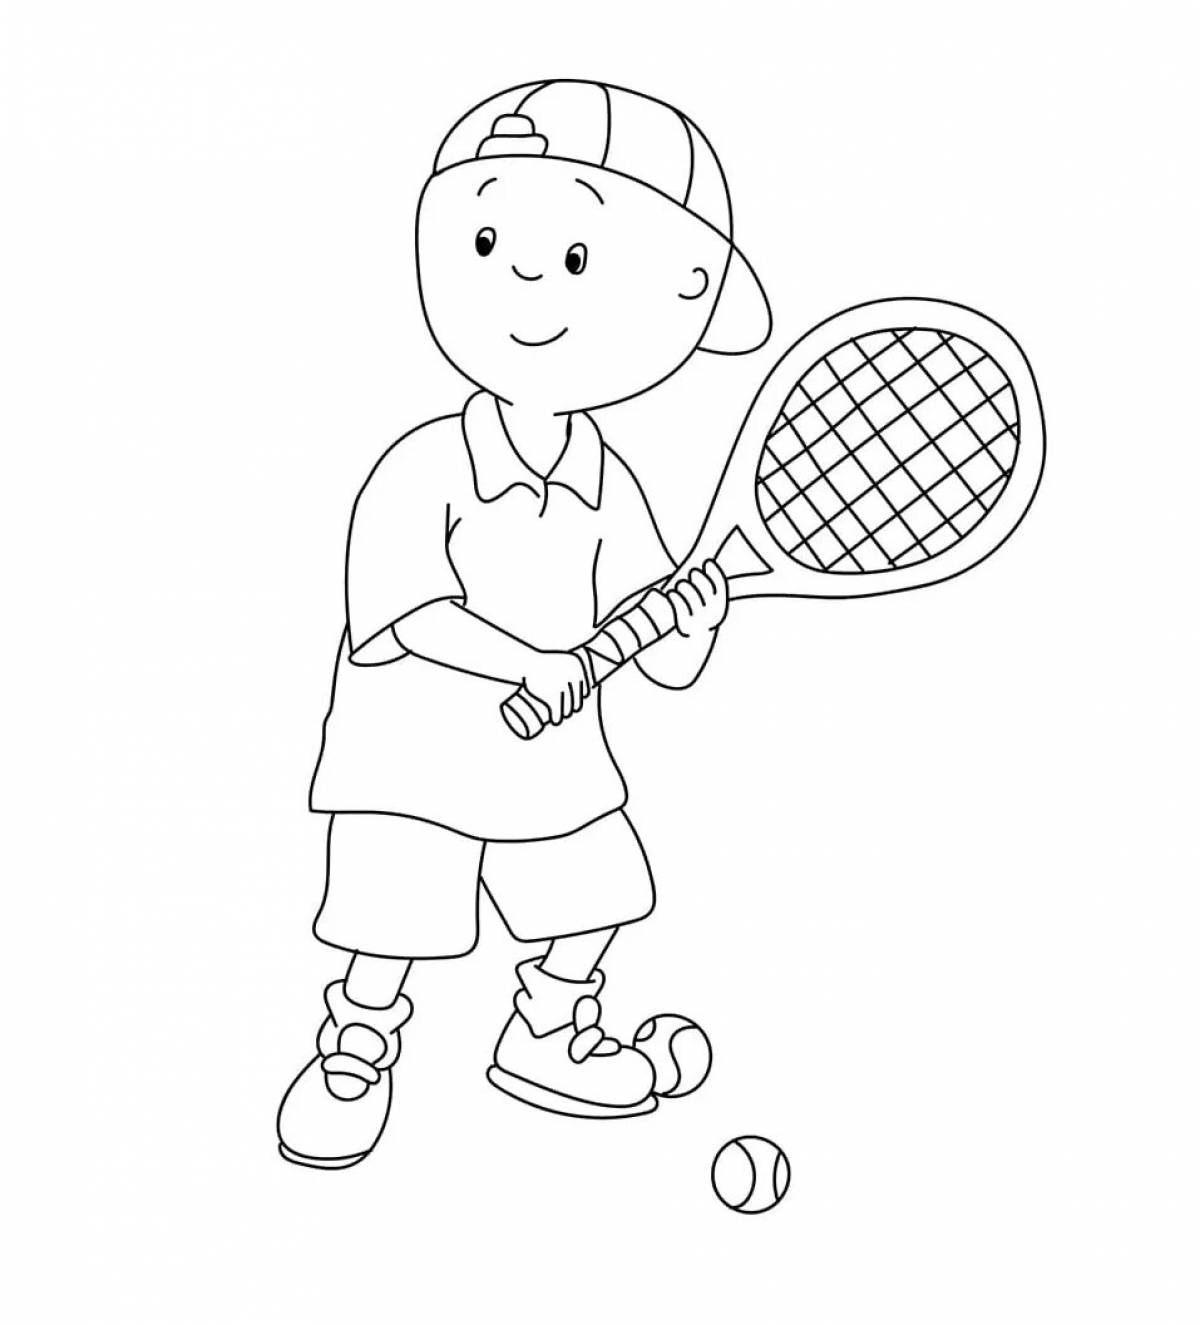 Colored sports coloring book for preschoolers